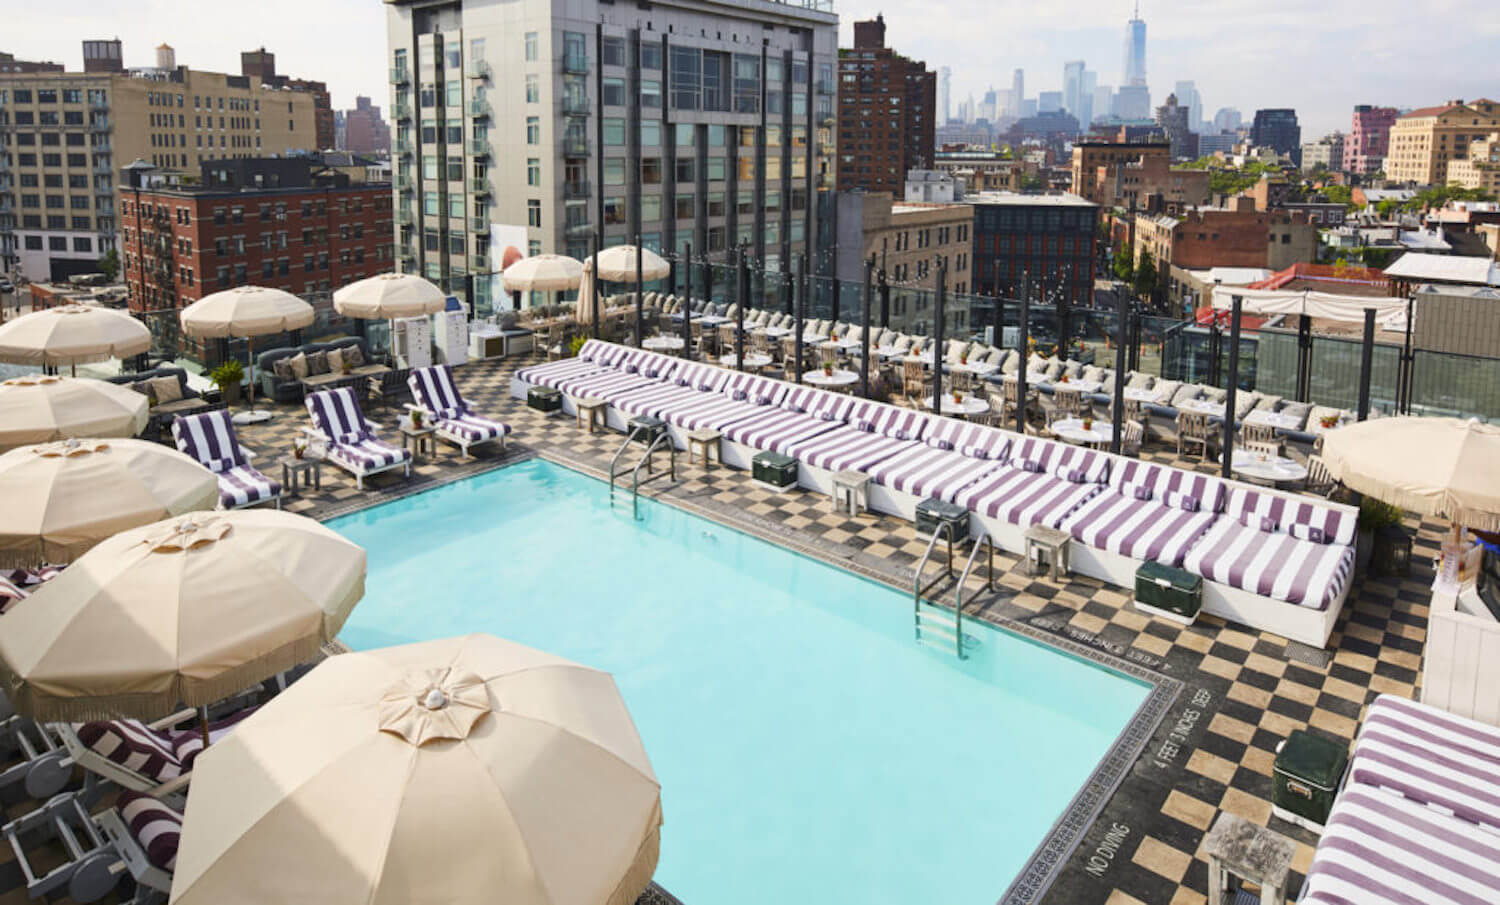 FOLLOWSUMMER – NYC’s Best Rooftop Pool Bars